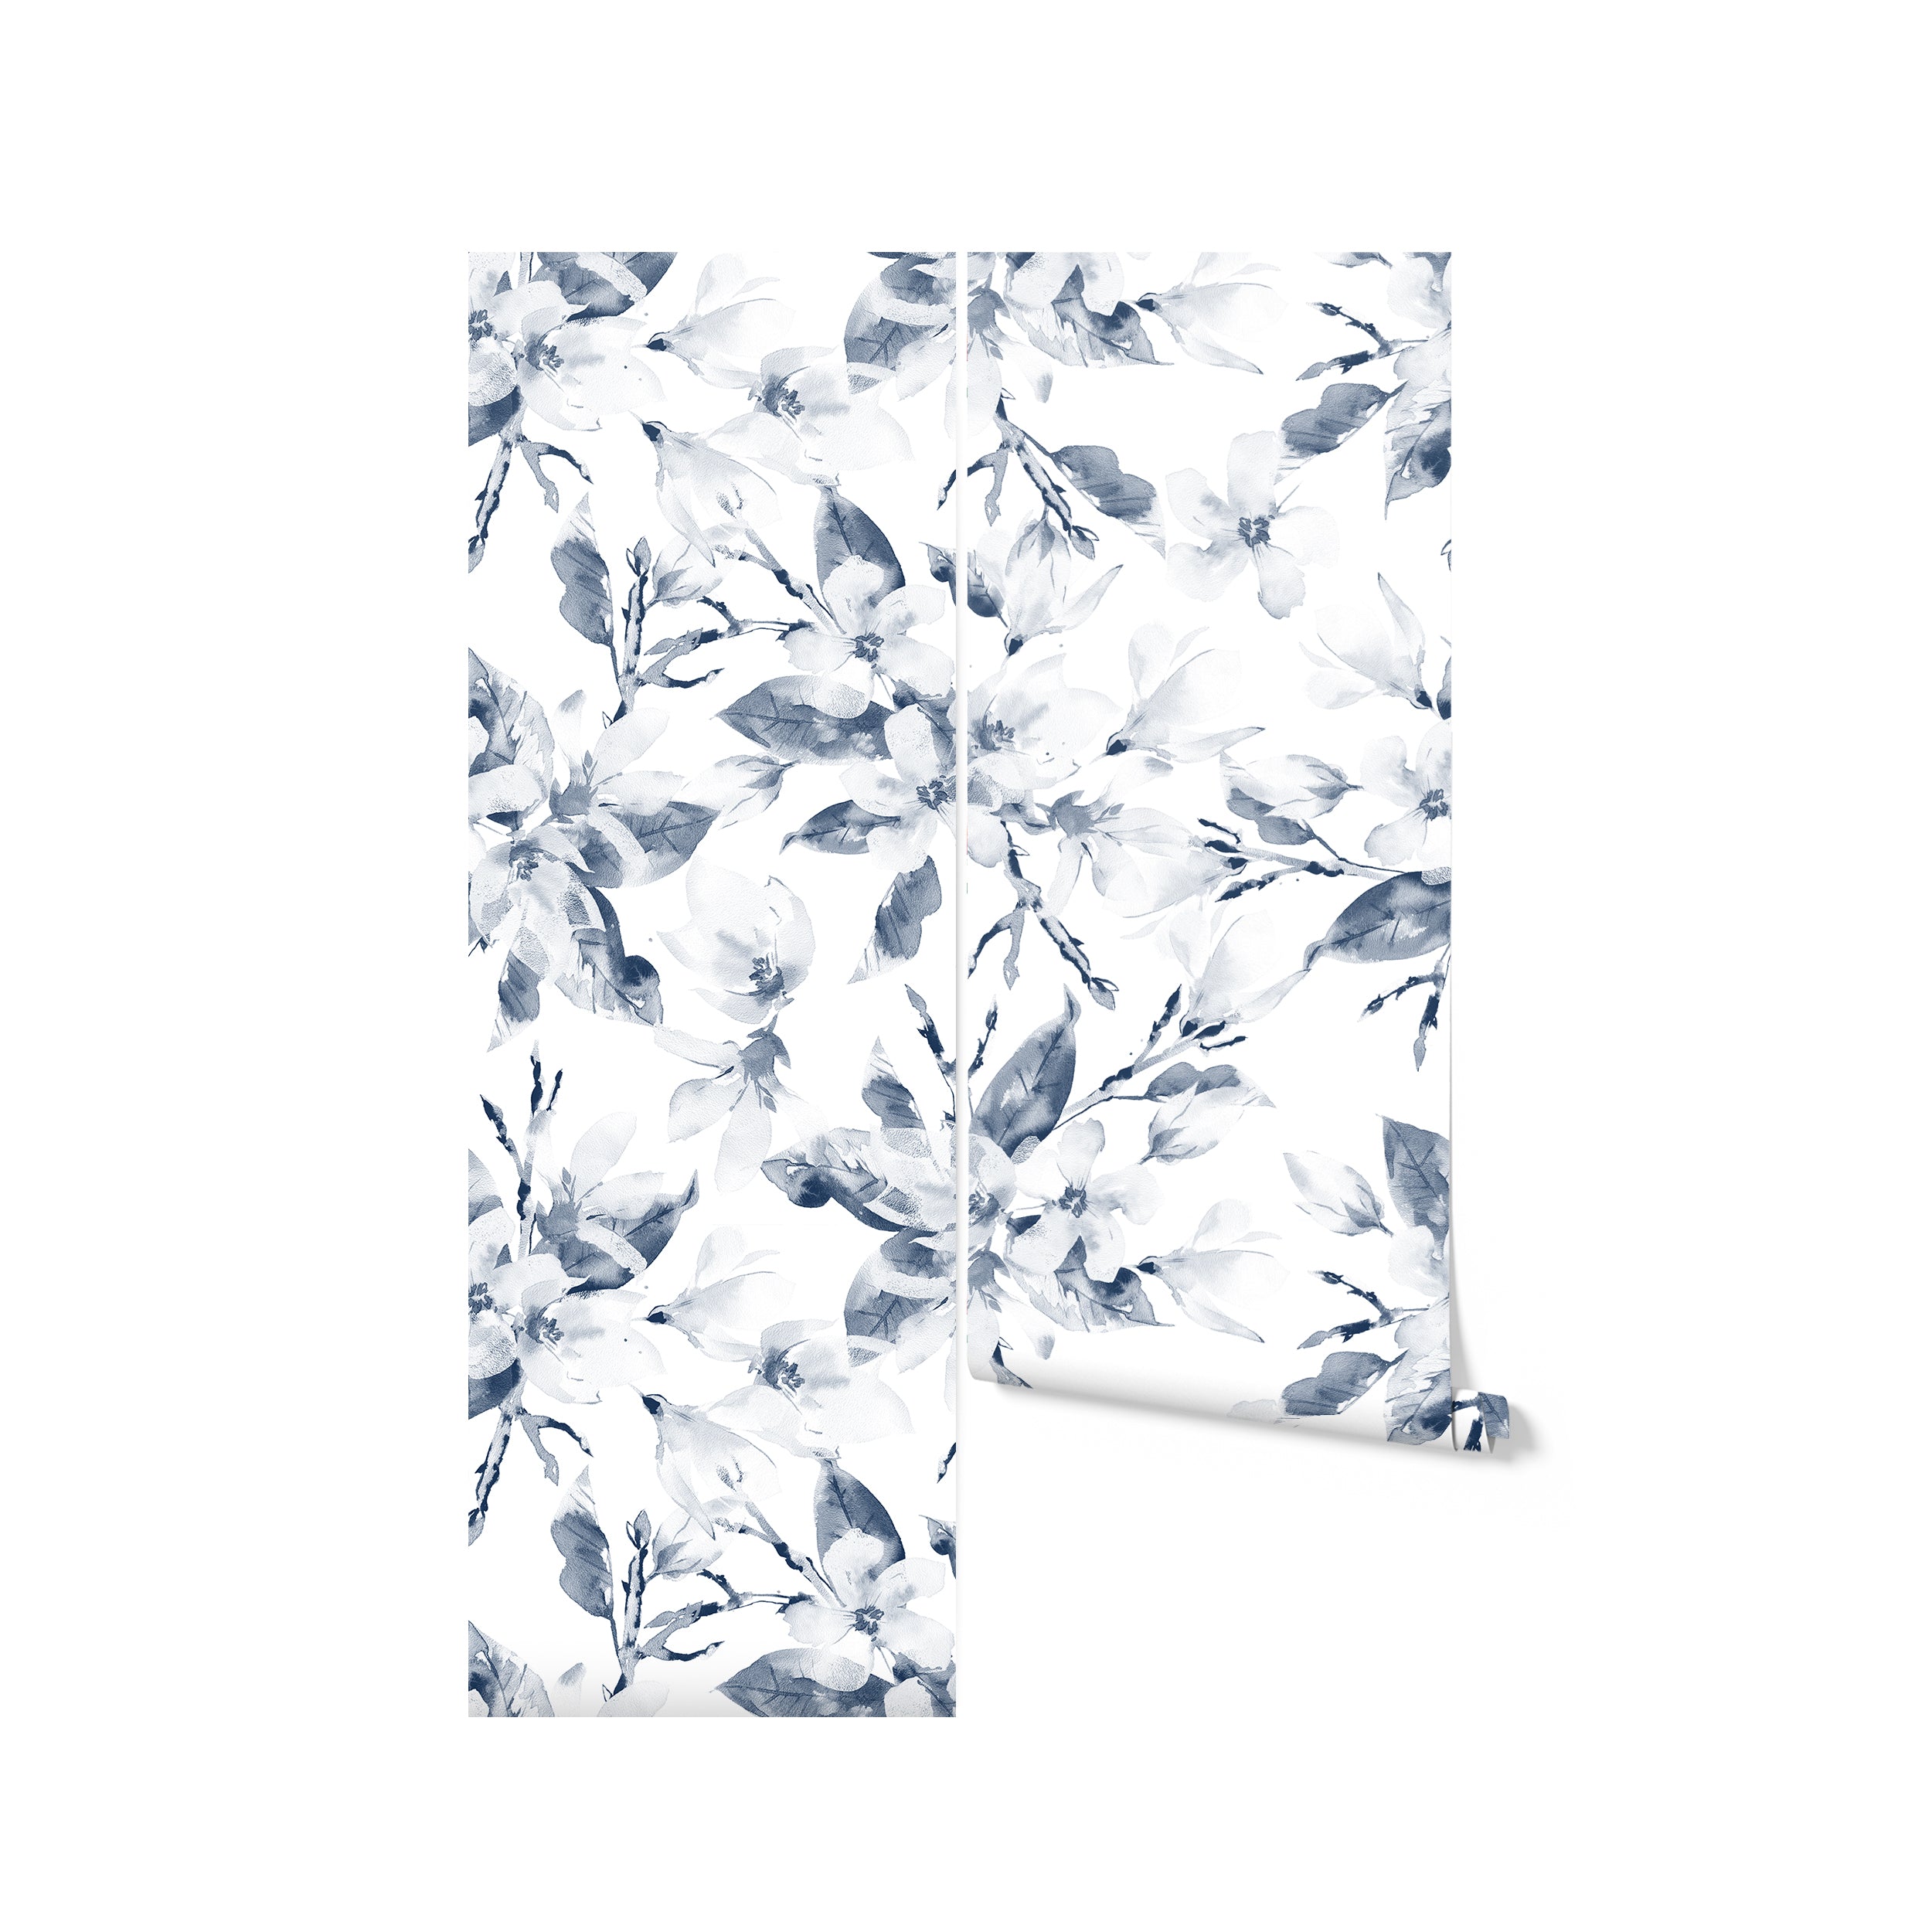 Roll of Elegant Wisdom Wallpaper IX in pale blue, displaying the sophisticated watercolor design of magnolia blossoms and leaves.